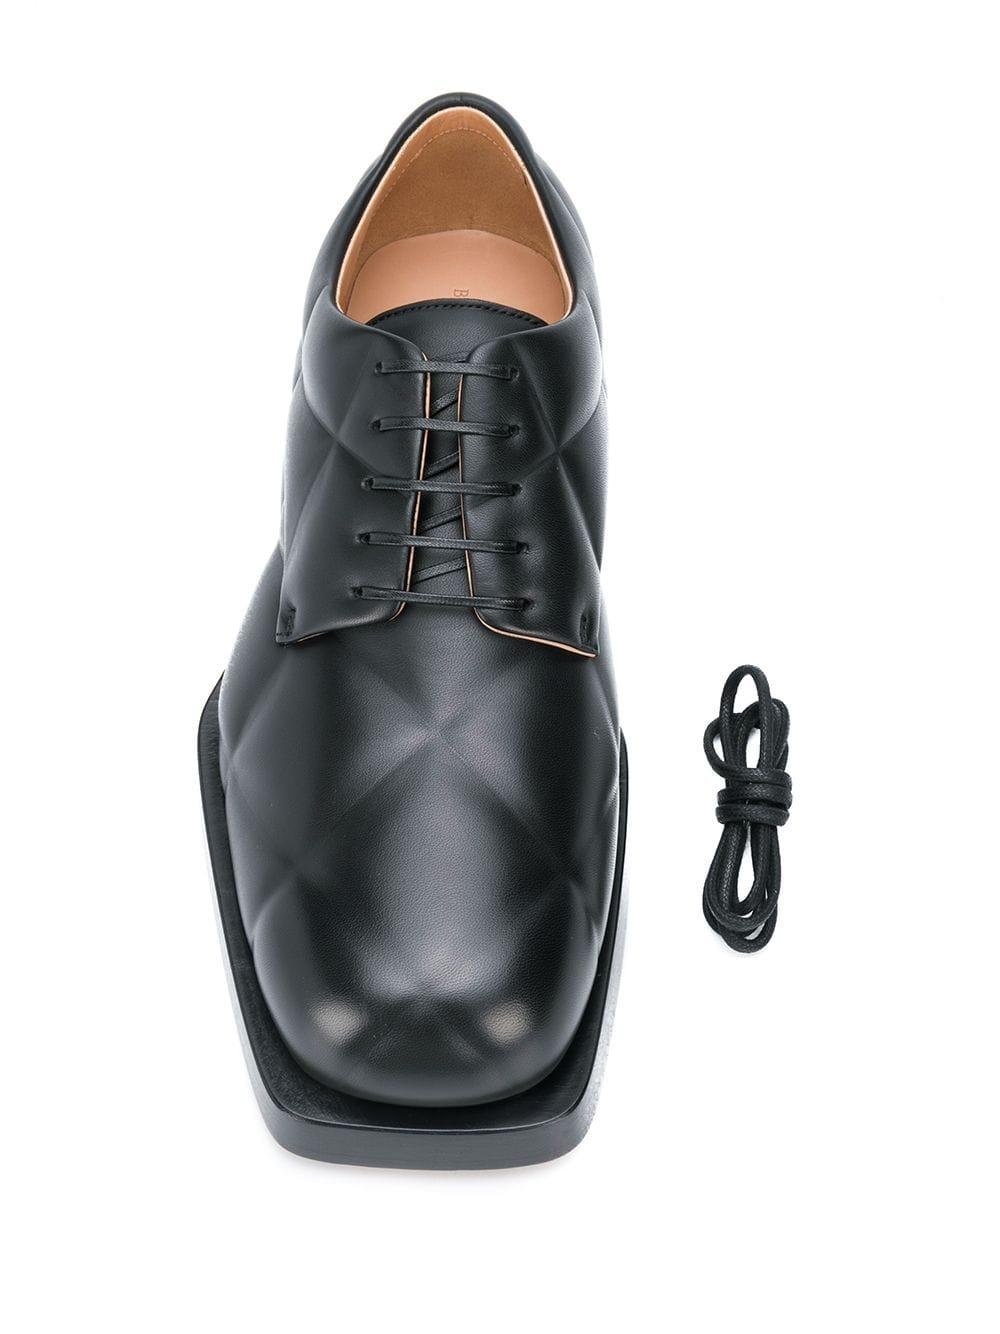 Bottega Veneta Leather Quilted Lace Up Shoes in Black for Men Mens Shoes Lace-ups Oxford shoes 